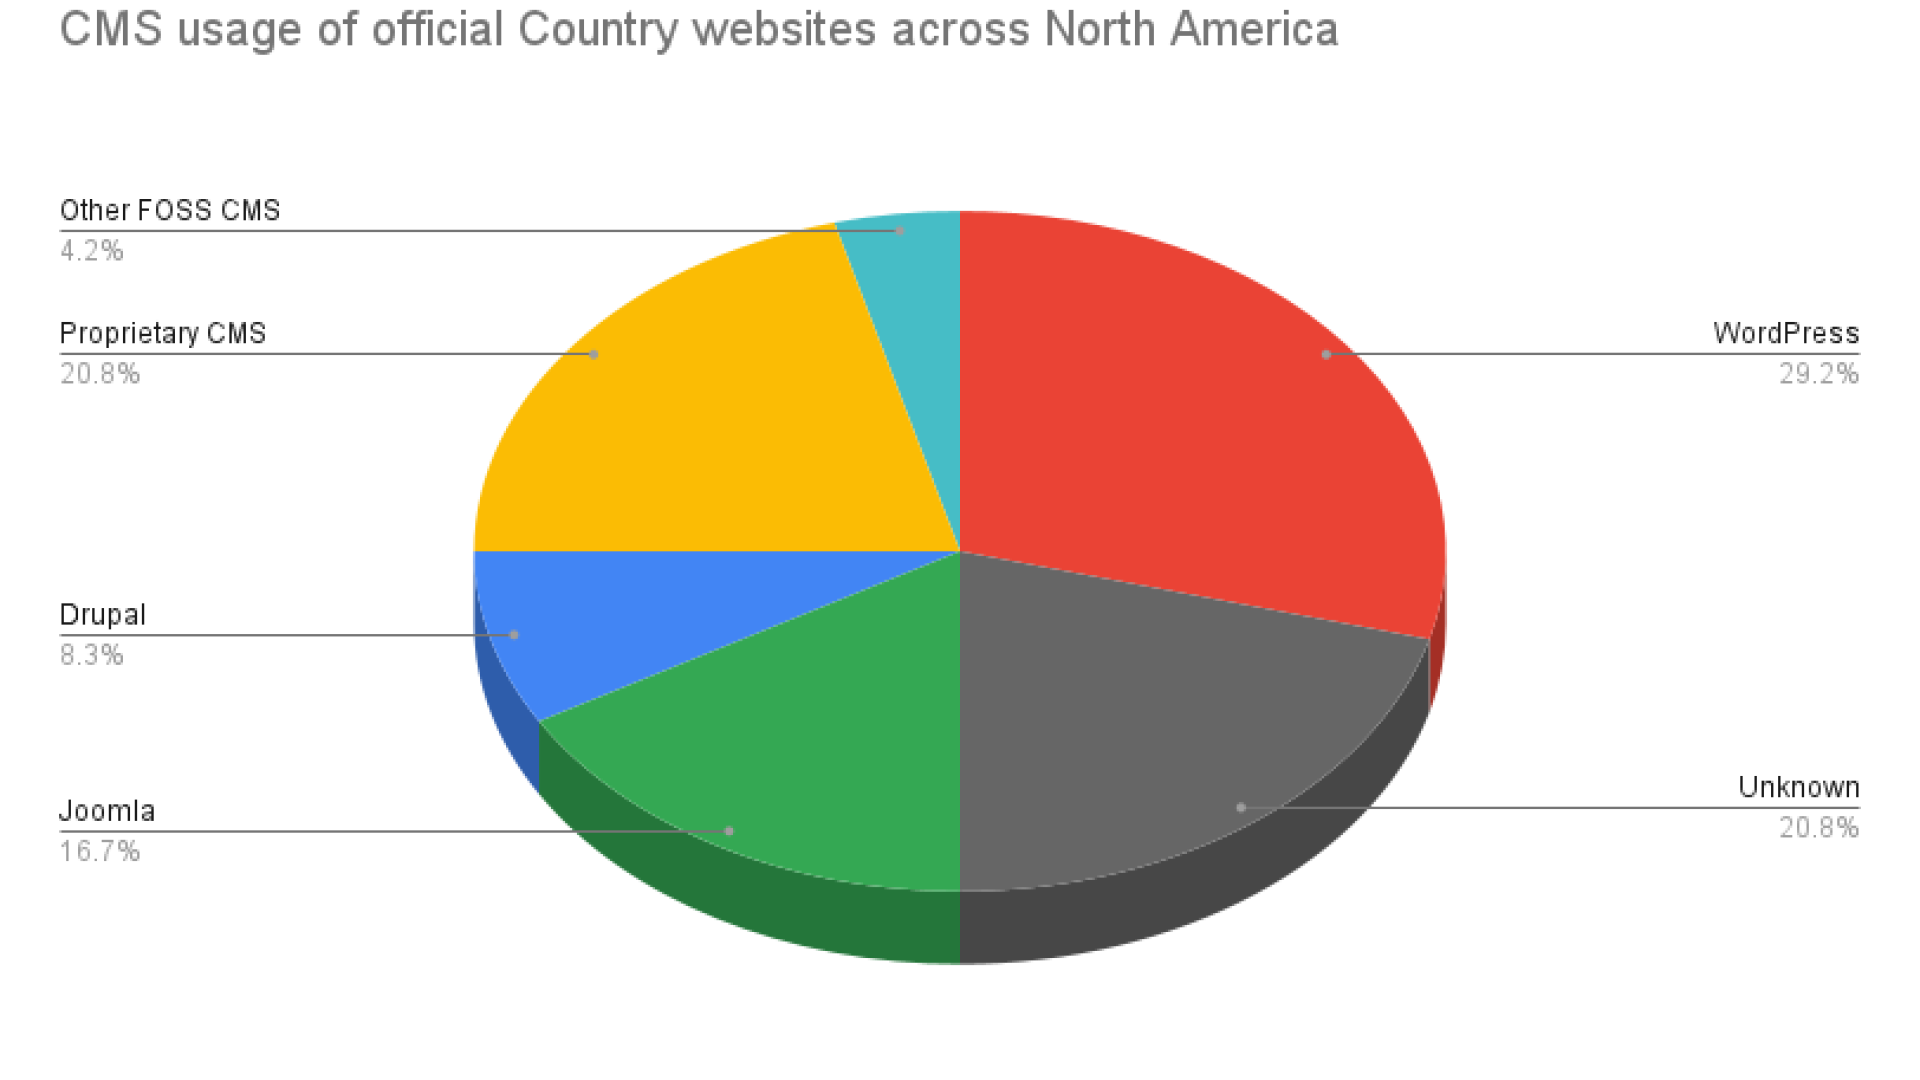 CMS usage of official country websites across North America